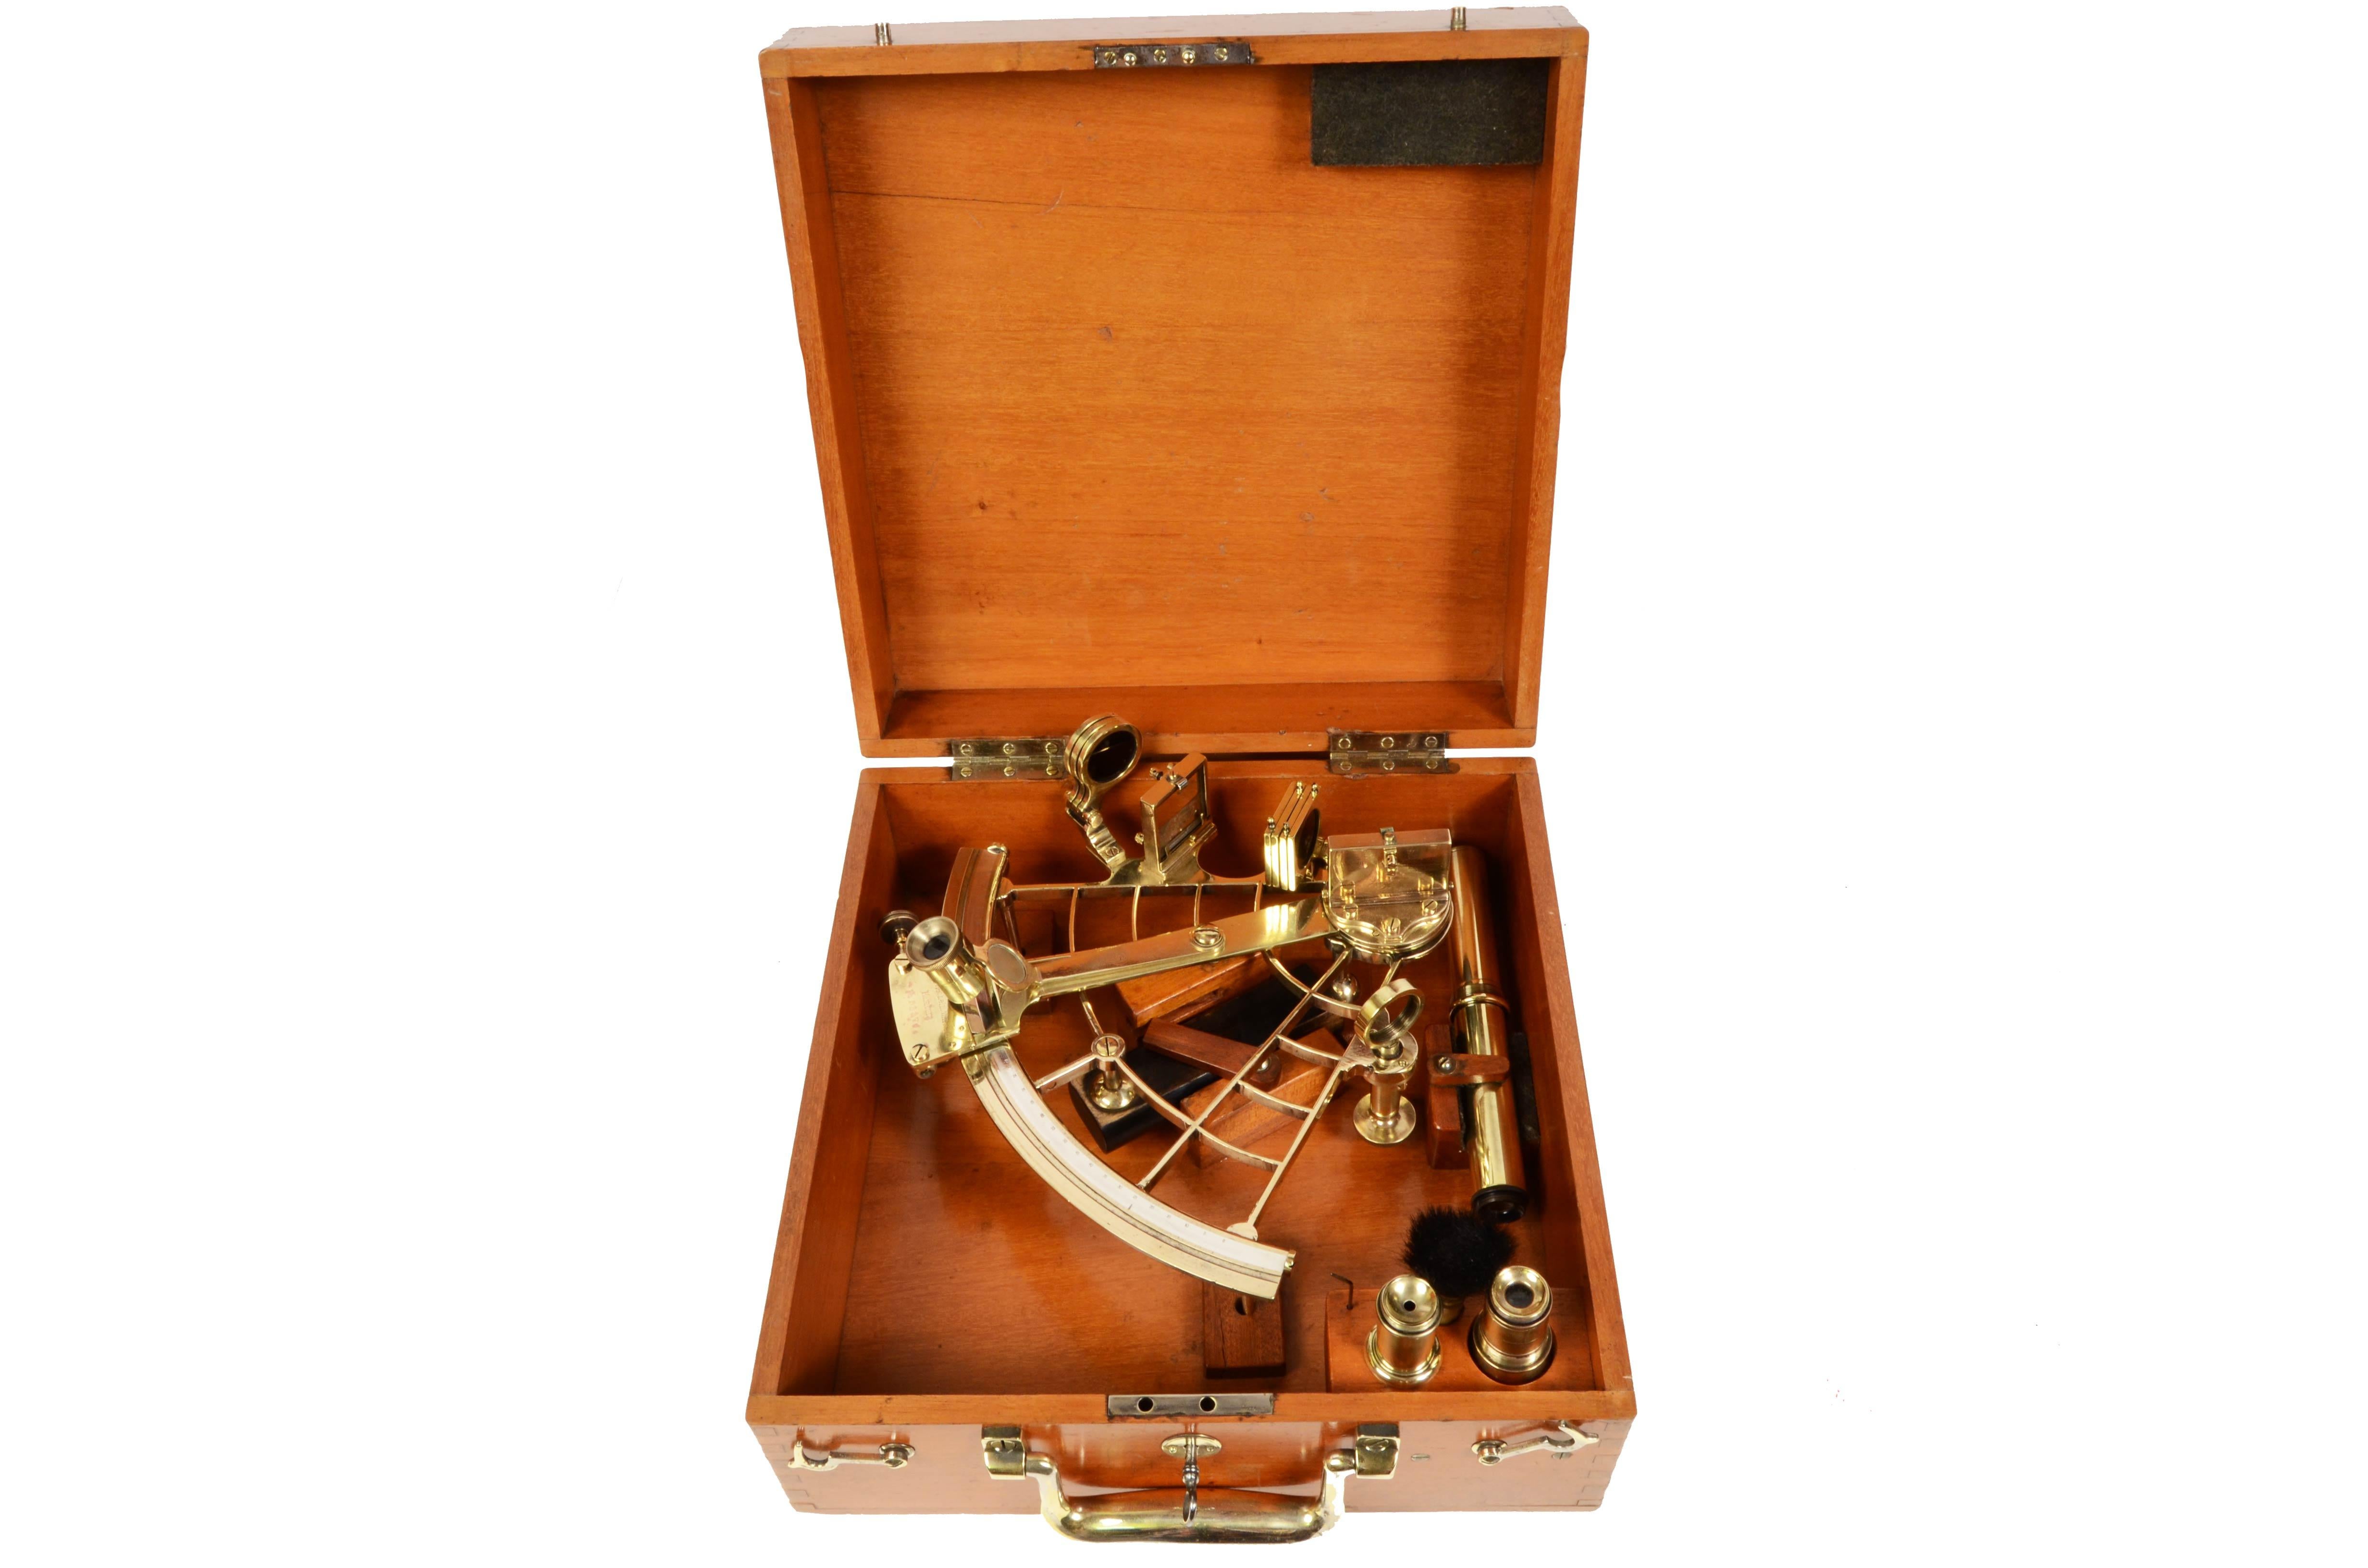 Brass sextant signed Georg Hechelmann Nachf Hamburg from the late 19th century, original wooden box with locking hooks, handles, brass hinges and key set. Flap and vernier in silver, wooden handle, 3 colored glasses for the fixed mirror and 4 for